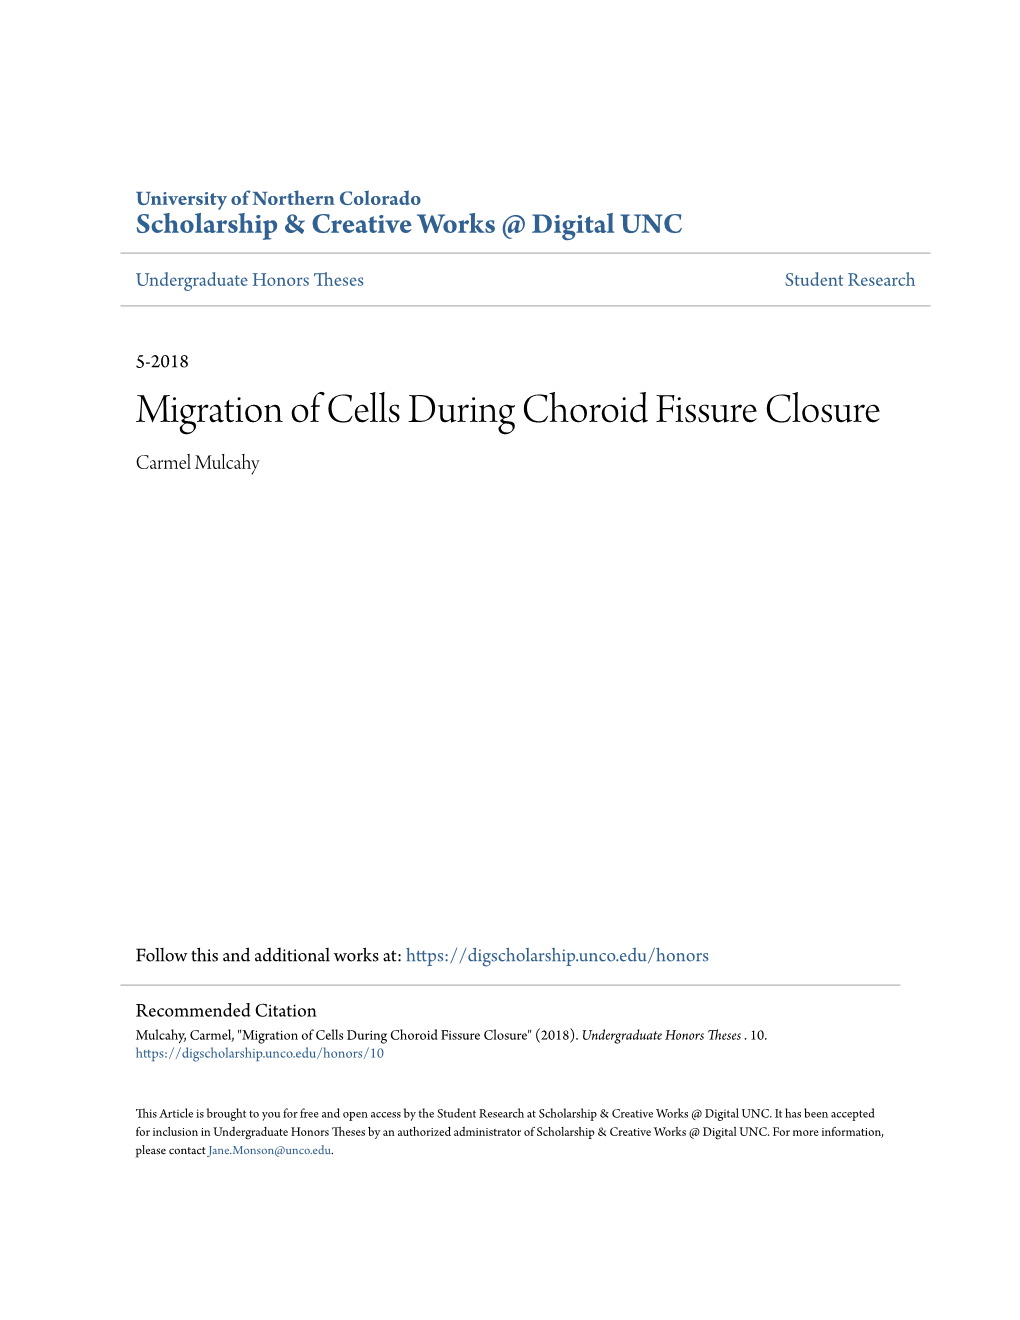 Migration of Cells During Choroid Fissure Closure Carmel Mulcahy